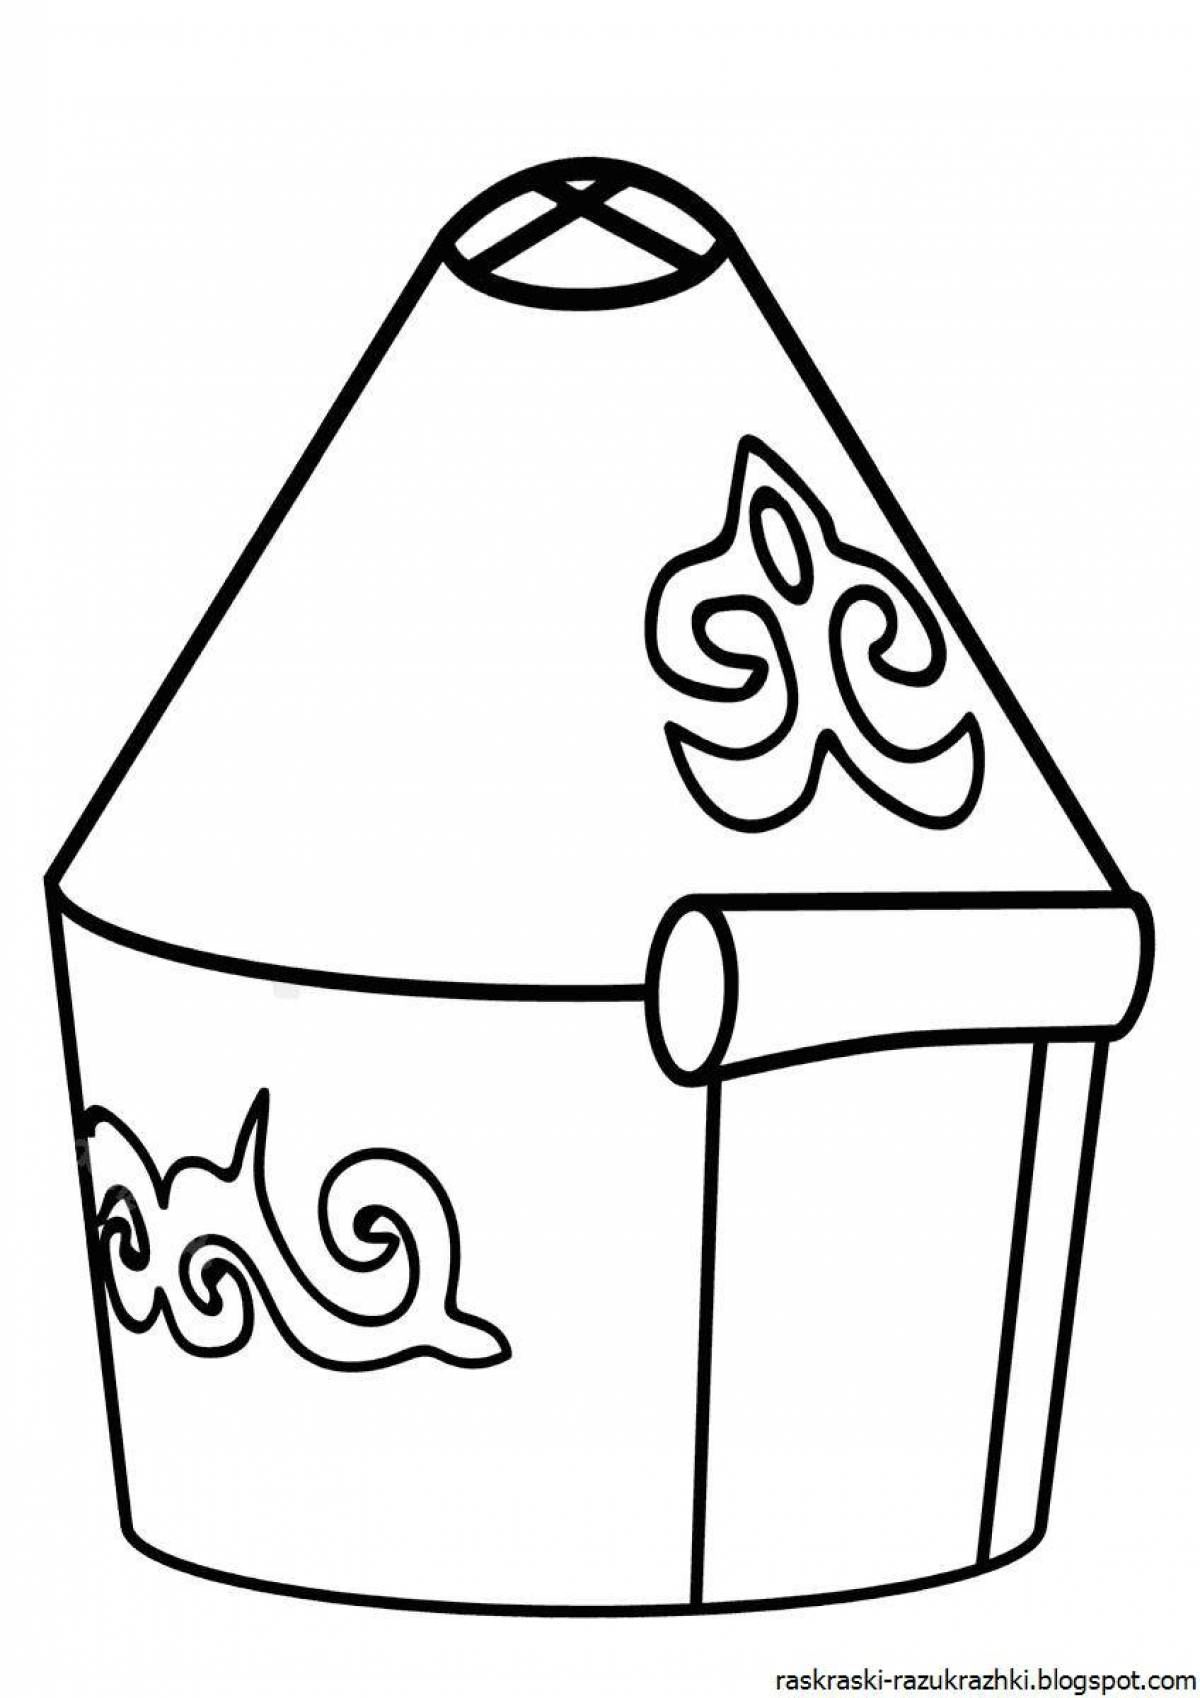 Coloring page adorable yurt for kids